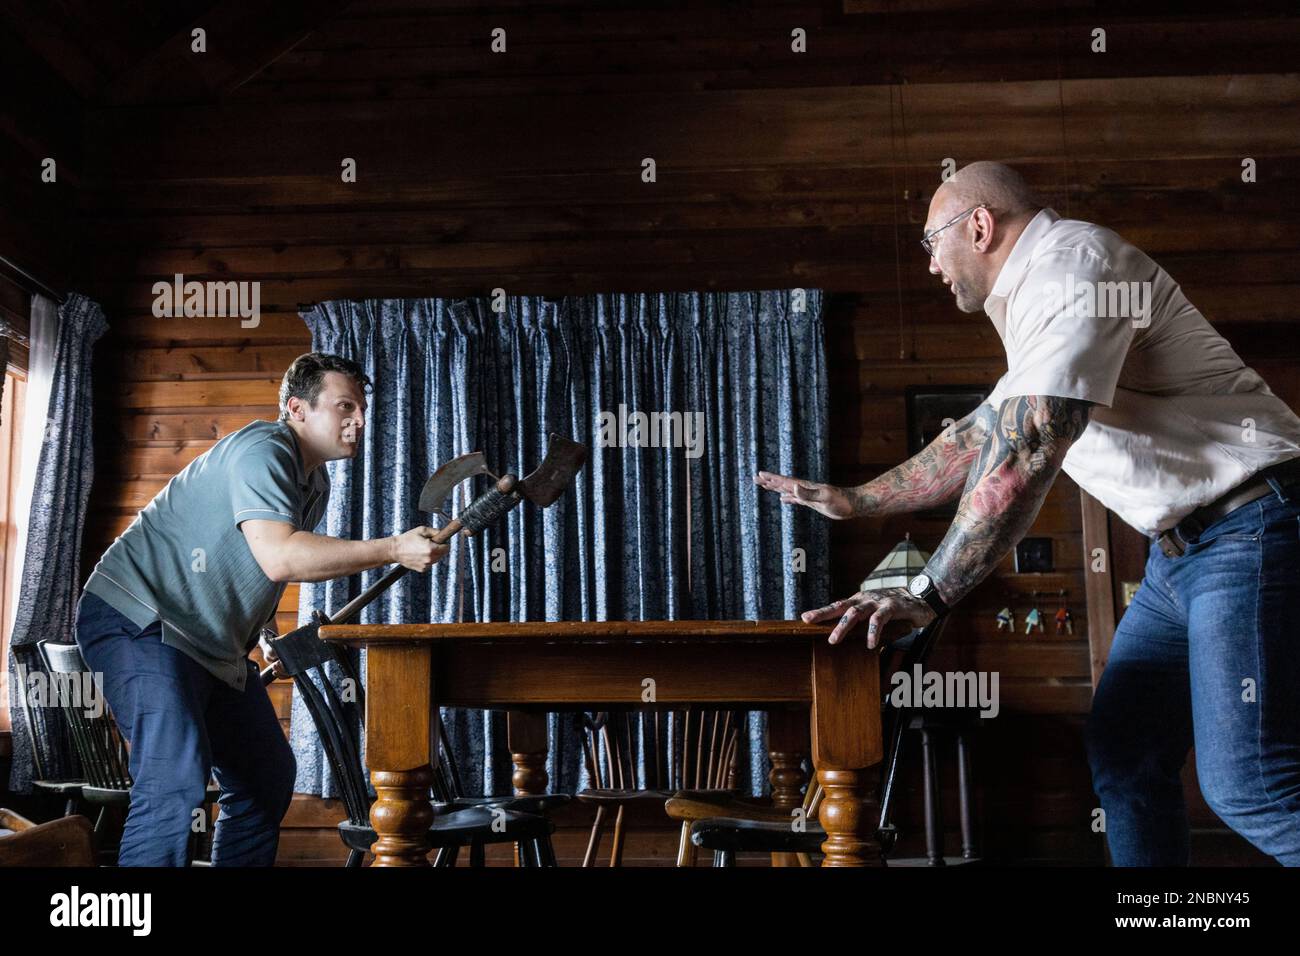 JONATHAN GROFF and DAVE BAUTISTA in KNOCK AT THE CABIN (2023), directed by M. NIGHT SHYAMALAN. Credit: UNIVERSAL PICTURES / Album Stock Photo